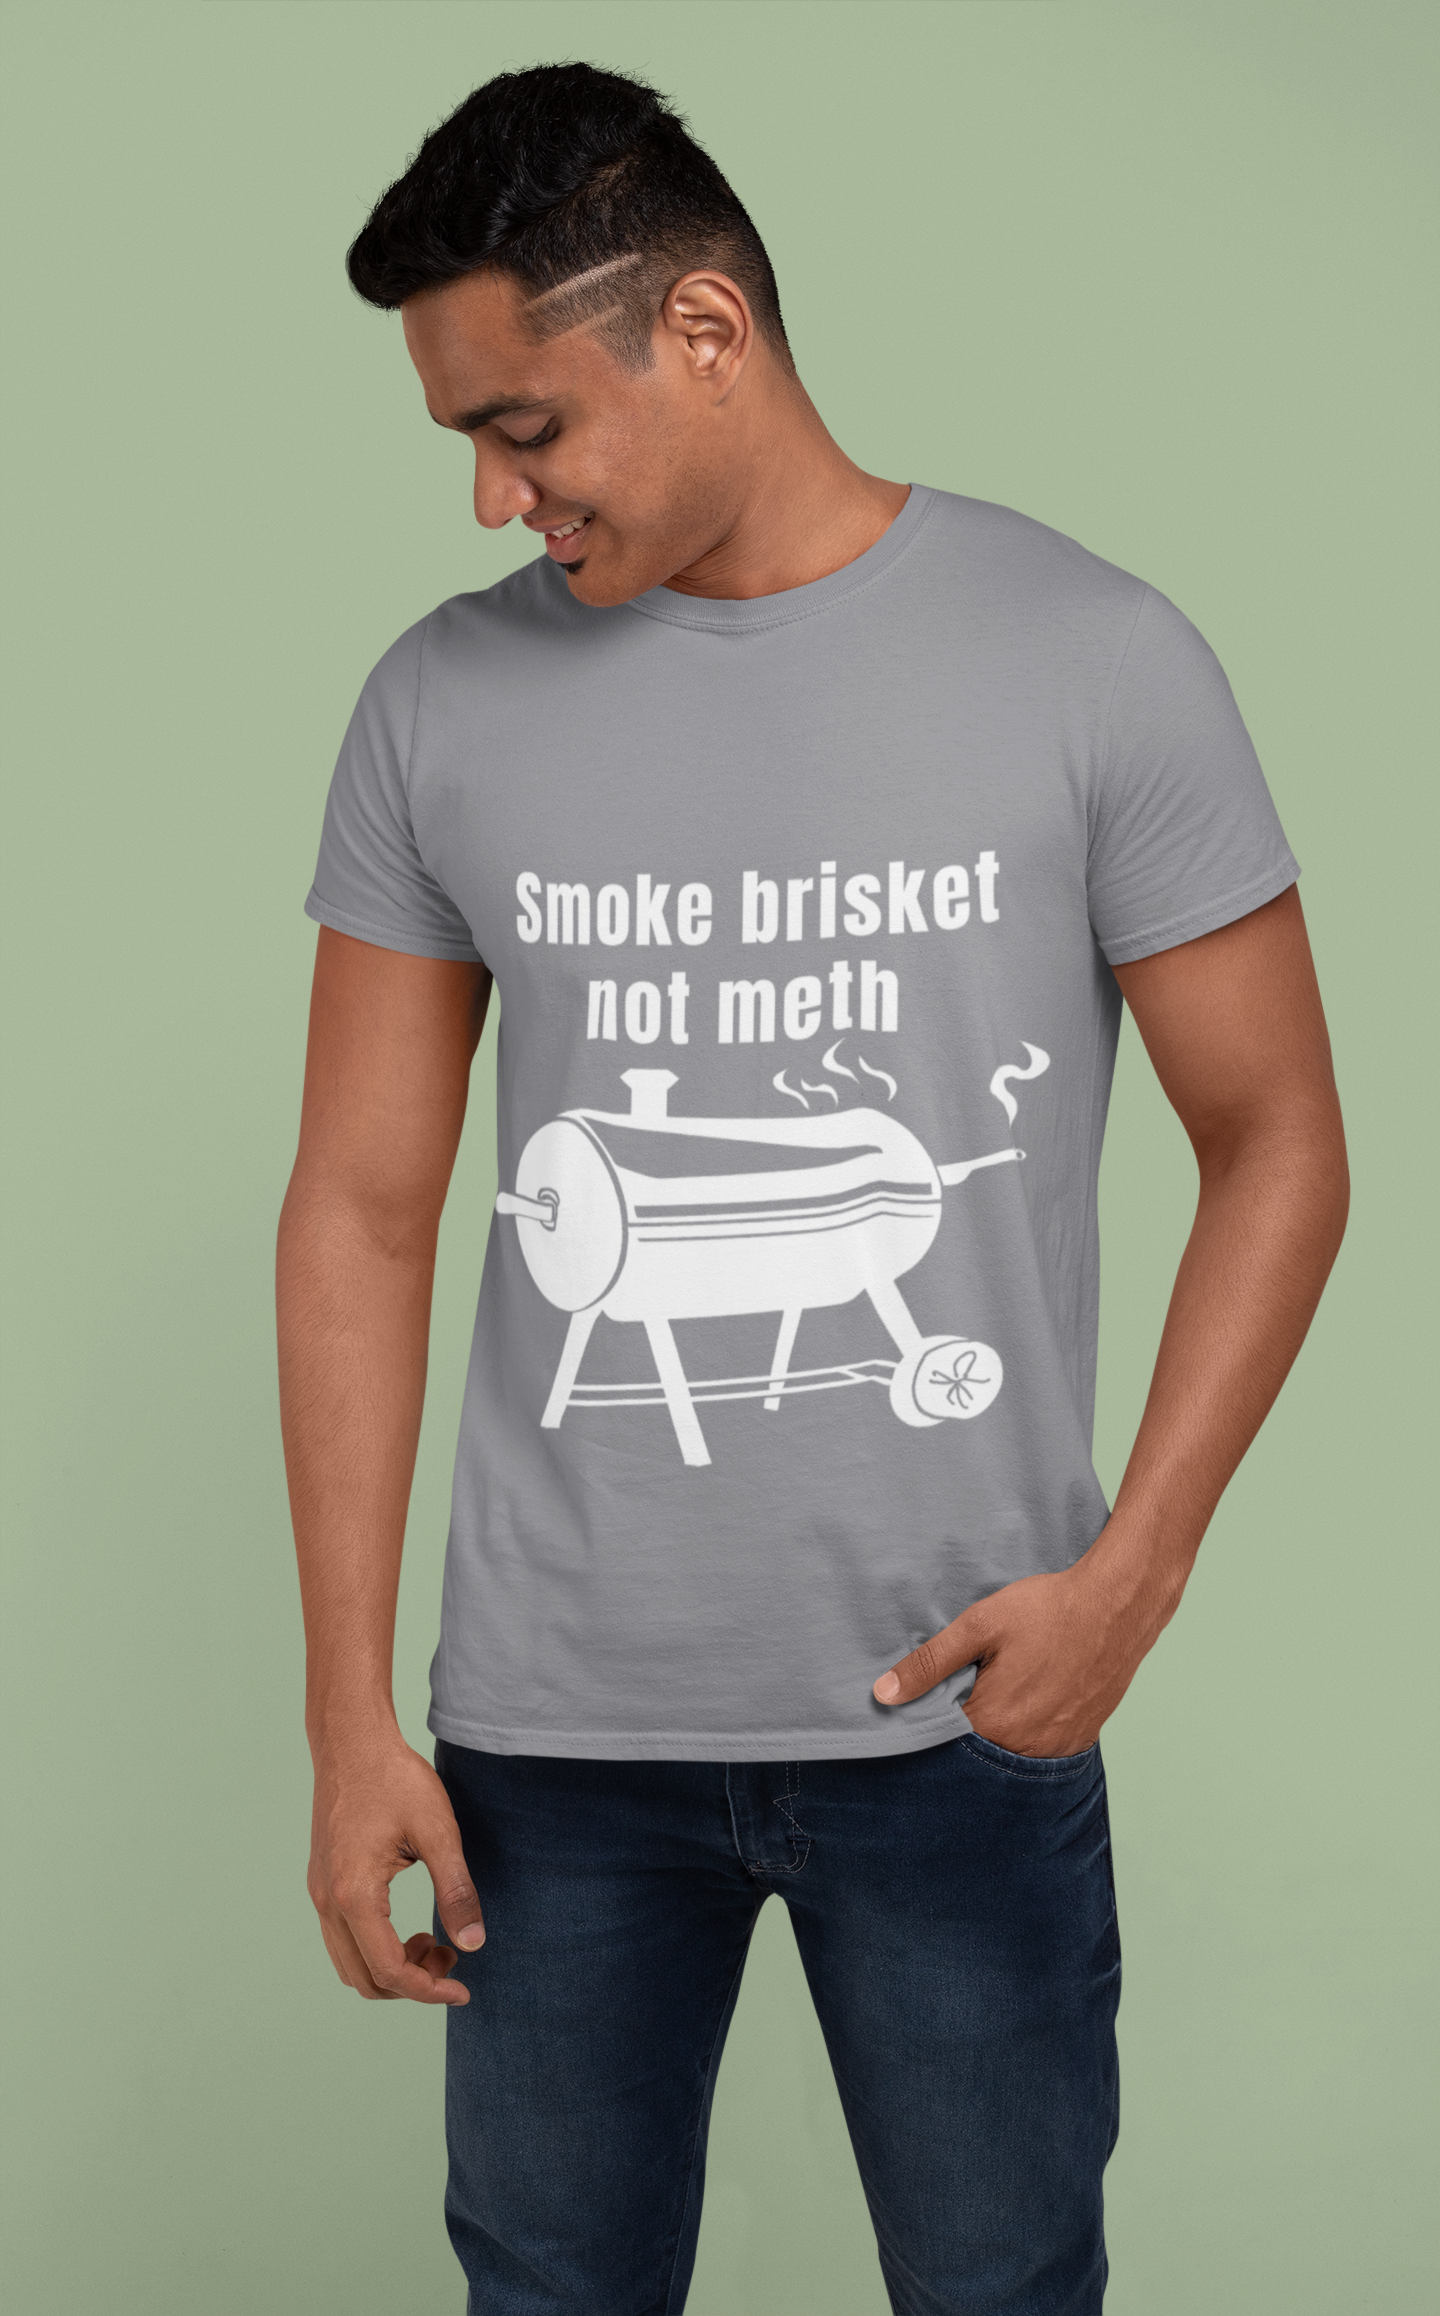 Smoke brisket not meth - Unisex T-Shirt brisket dads day gift gift for dad gift for grandpa gift for her gift for him gift for mom gift for sister gift for wife meat meat diet meth moms gift smoke smoking Unique gift